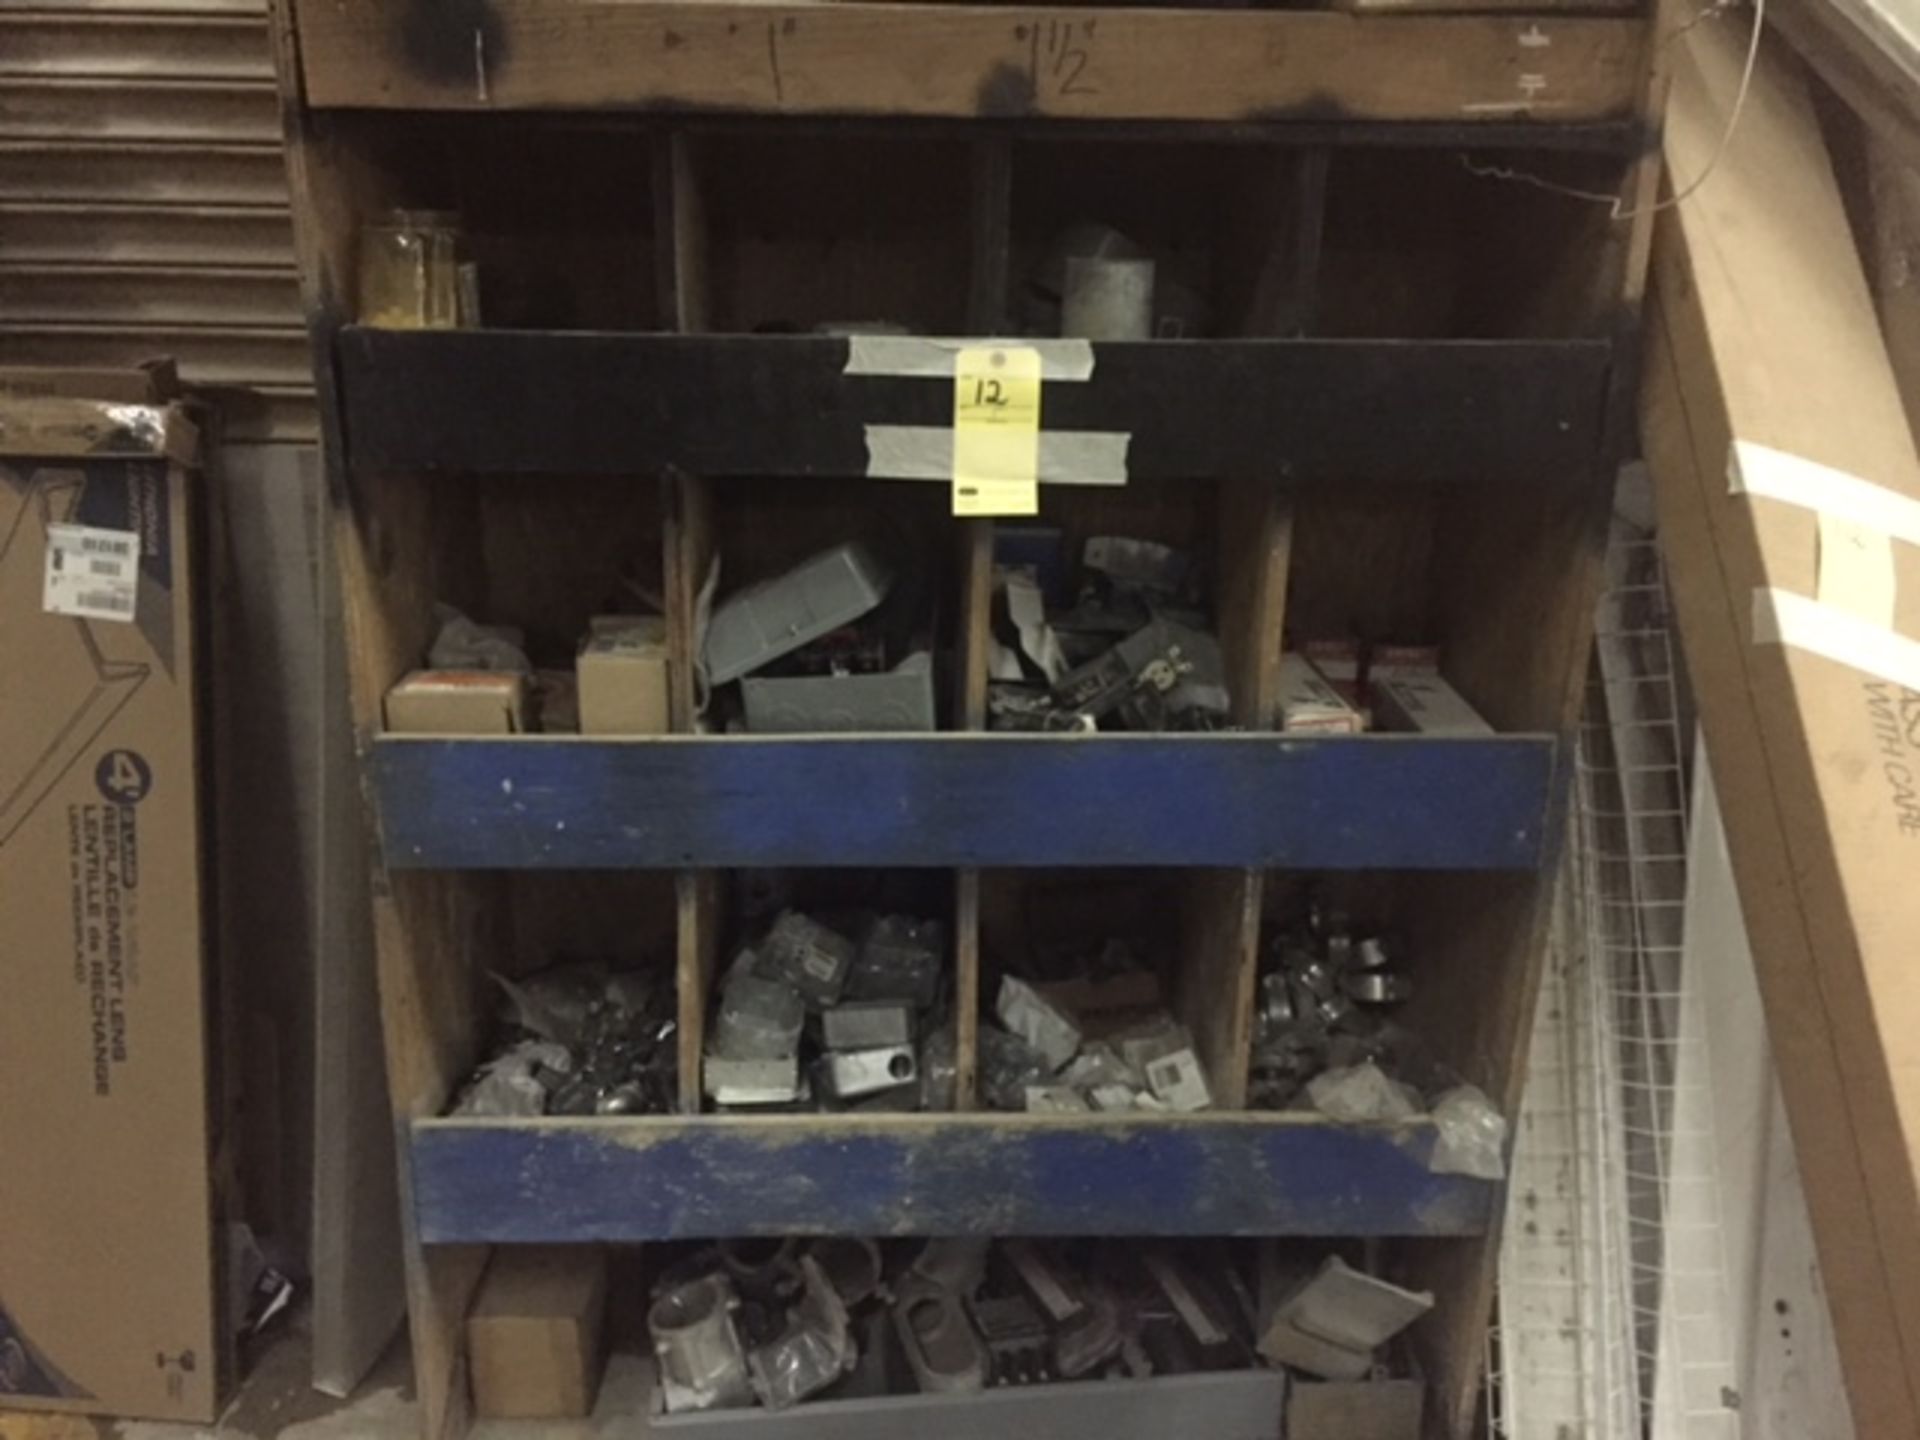 LOT OF ELECTRICAL SUPPLIES: outlet boxes, fittings, clamps, telescopic power polls, etc.